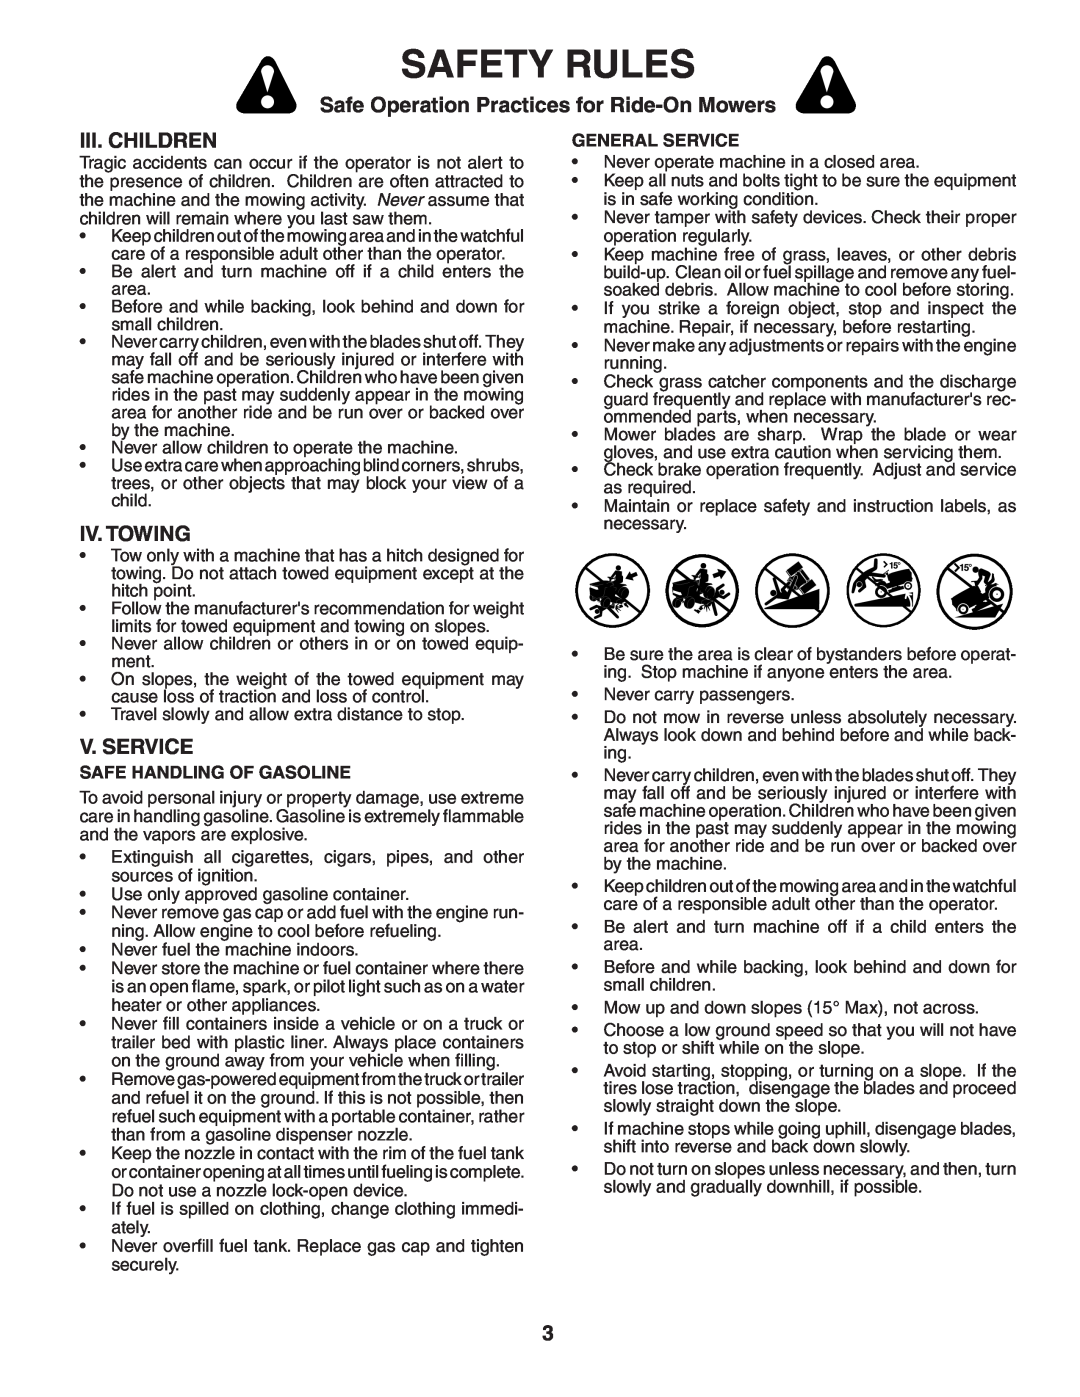 Poulan 403808 manual Iii. Children, Iv. Towing, V. Service, Safety Rules, Safe Operation Practices for Ride-On Mowers 